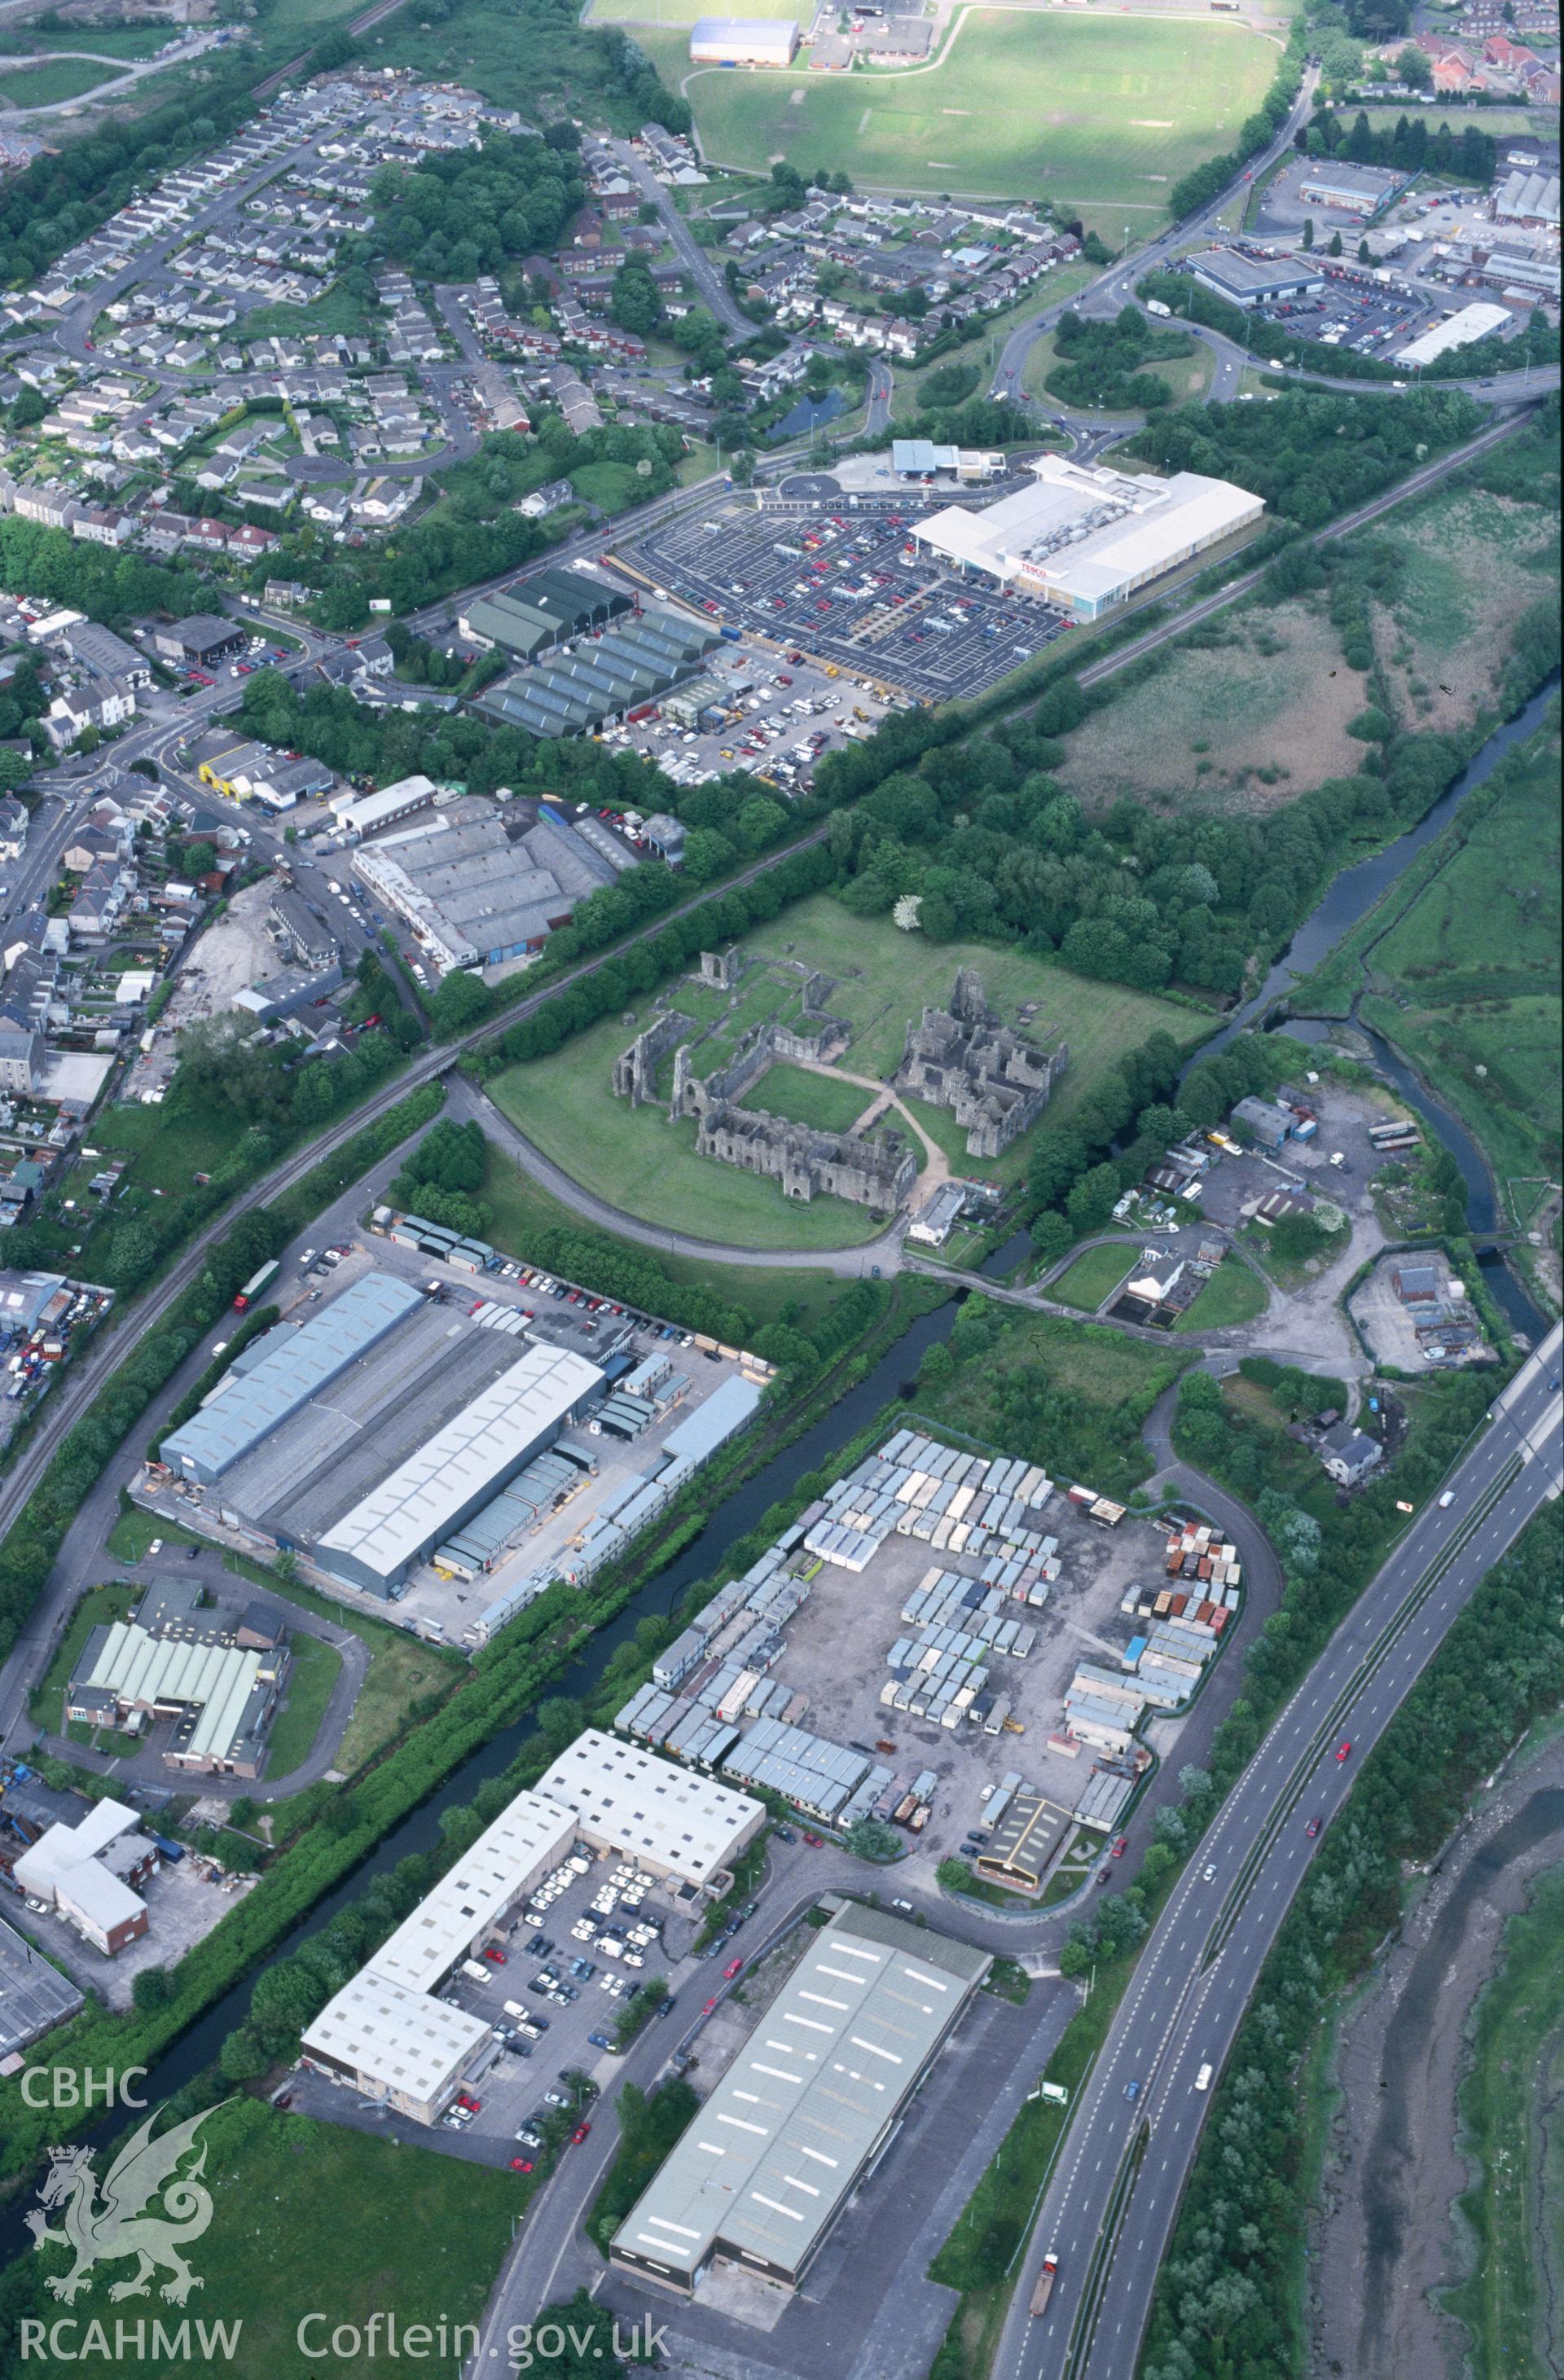 Slide of RCAHMW colour oblique aerial photograph of Neath, taken by T.G. Driver, 22/5/2000.